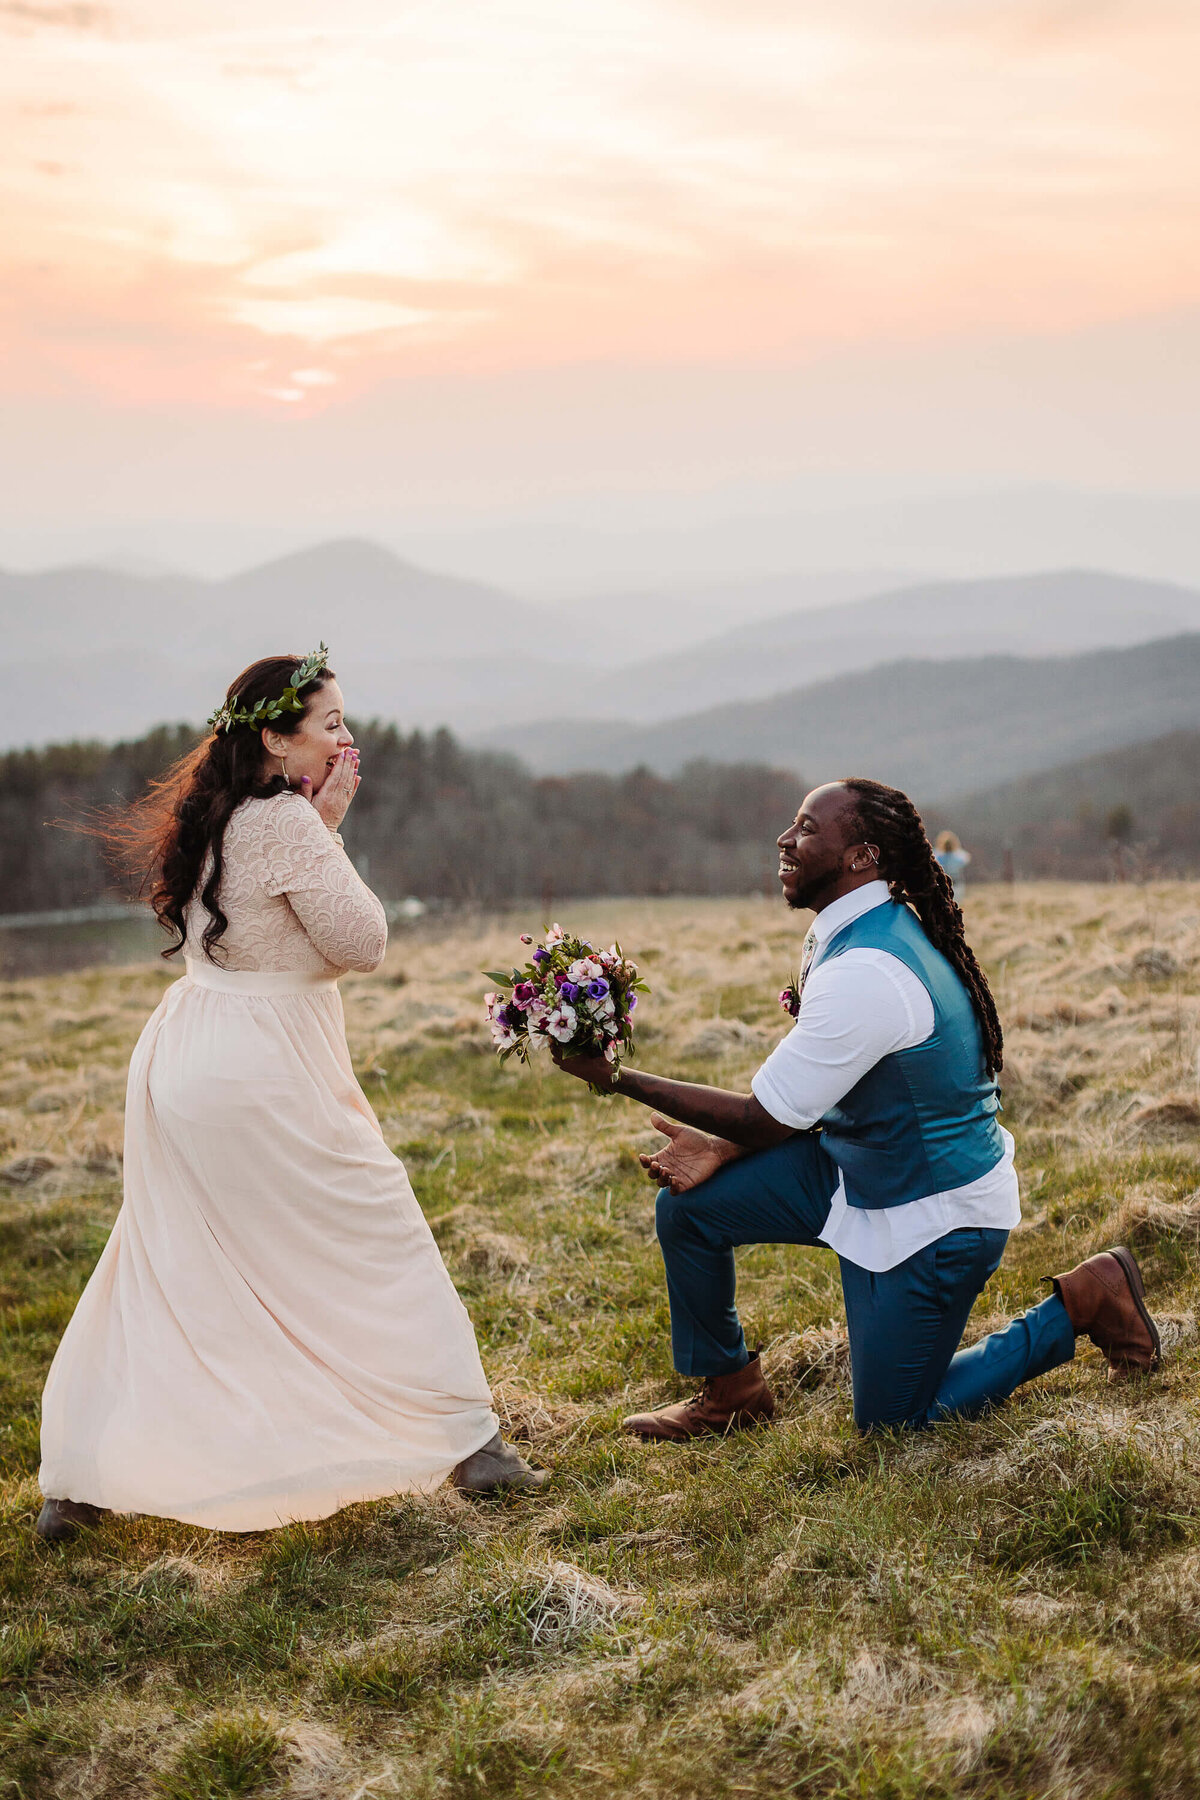 Max-Patch-Sunset-Mountain-Elopement-132